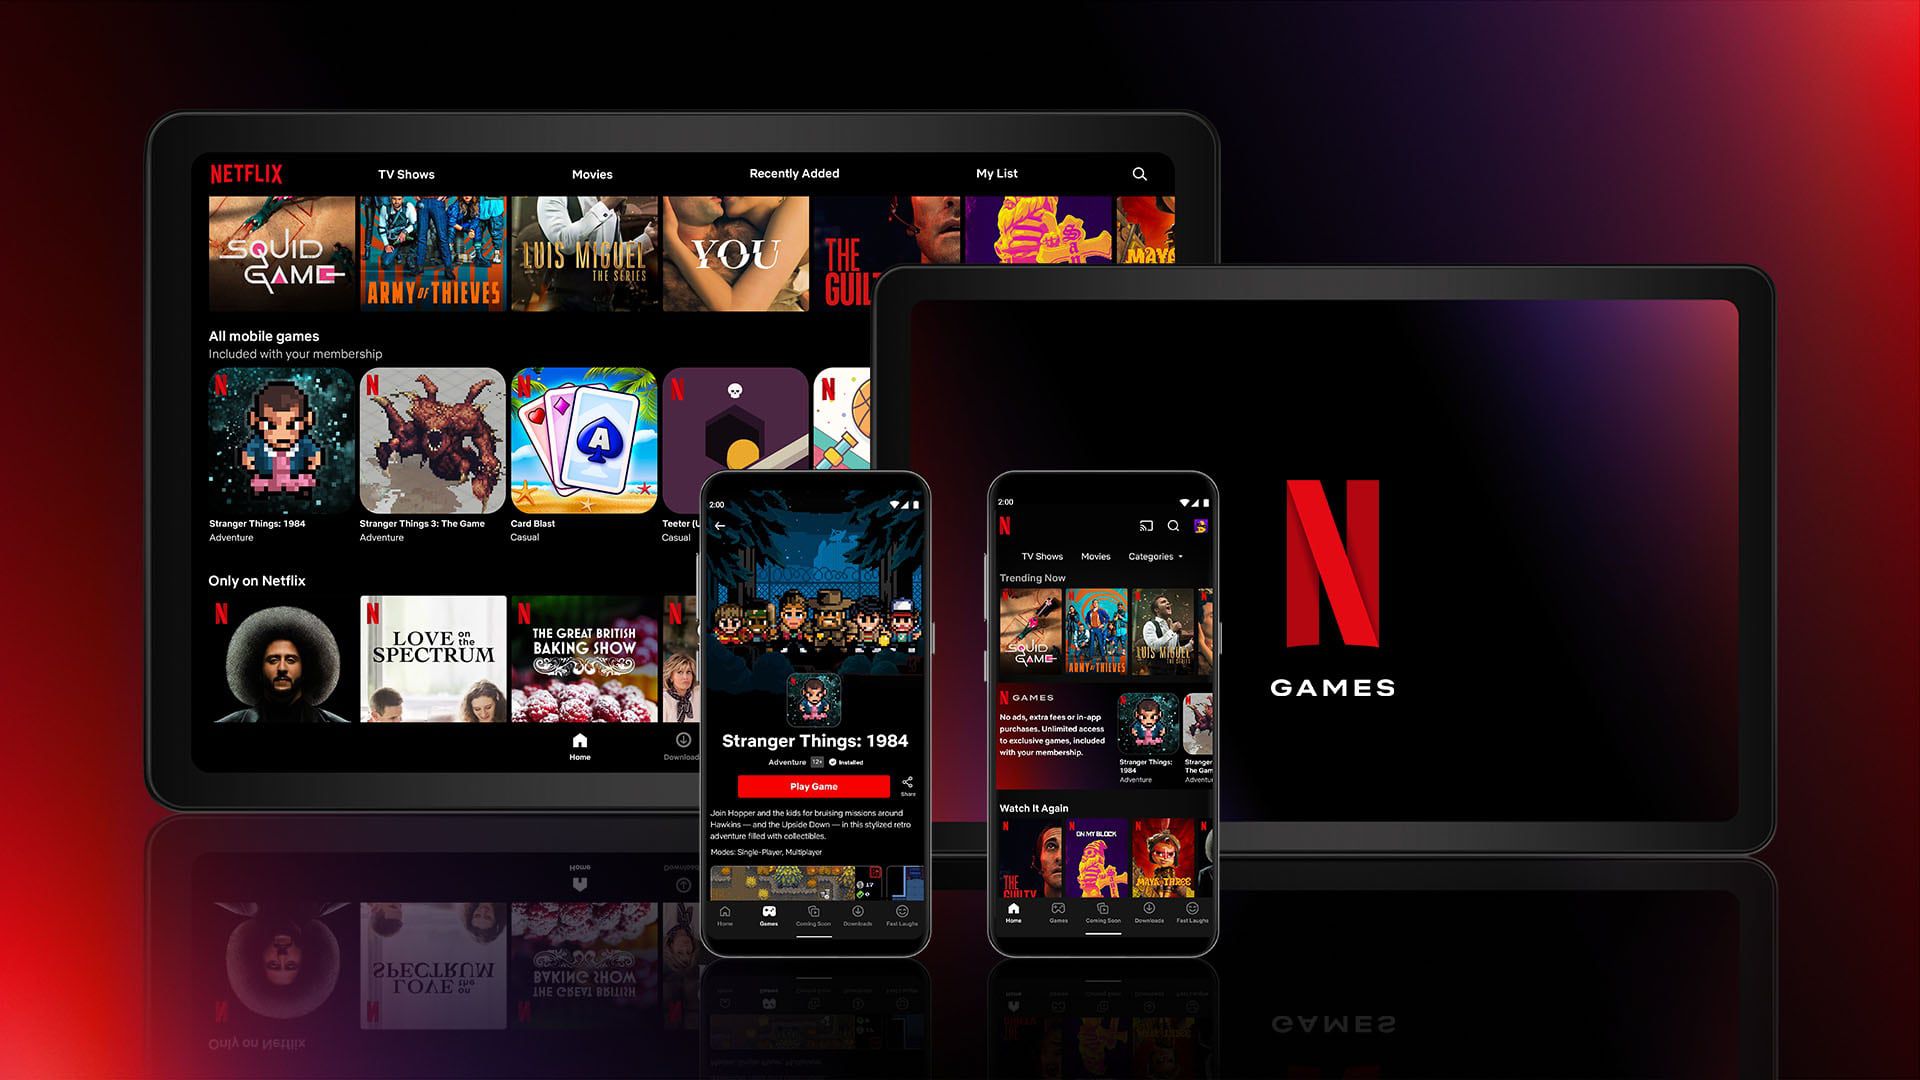 New Netflix Games Feature Now Available on iOS Devices